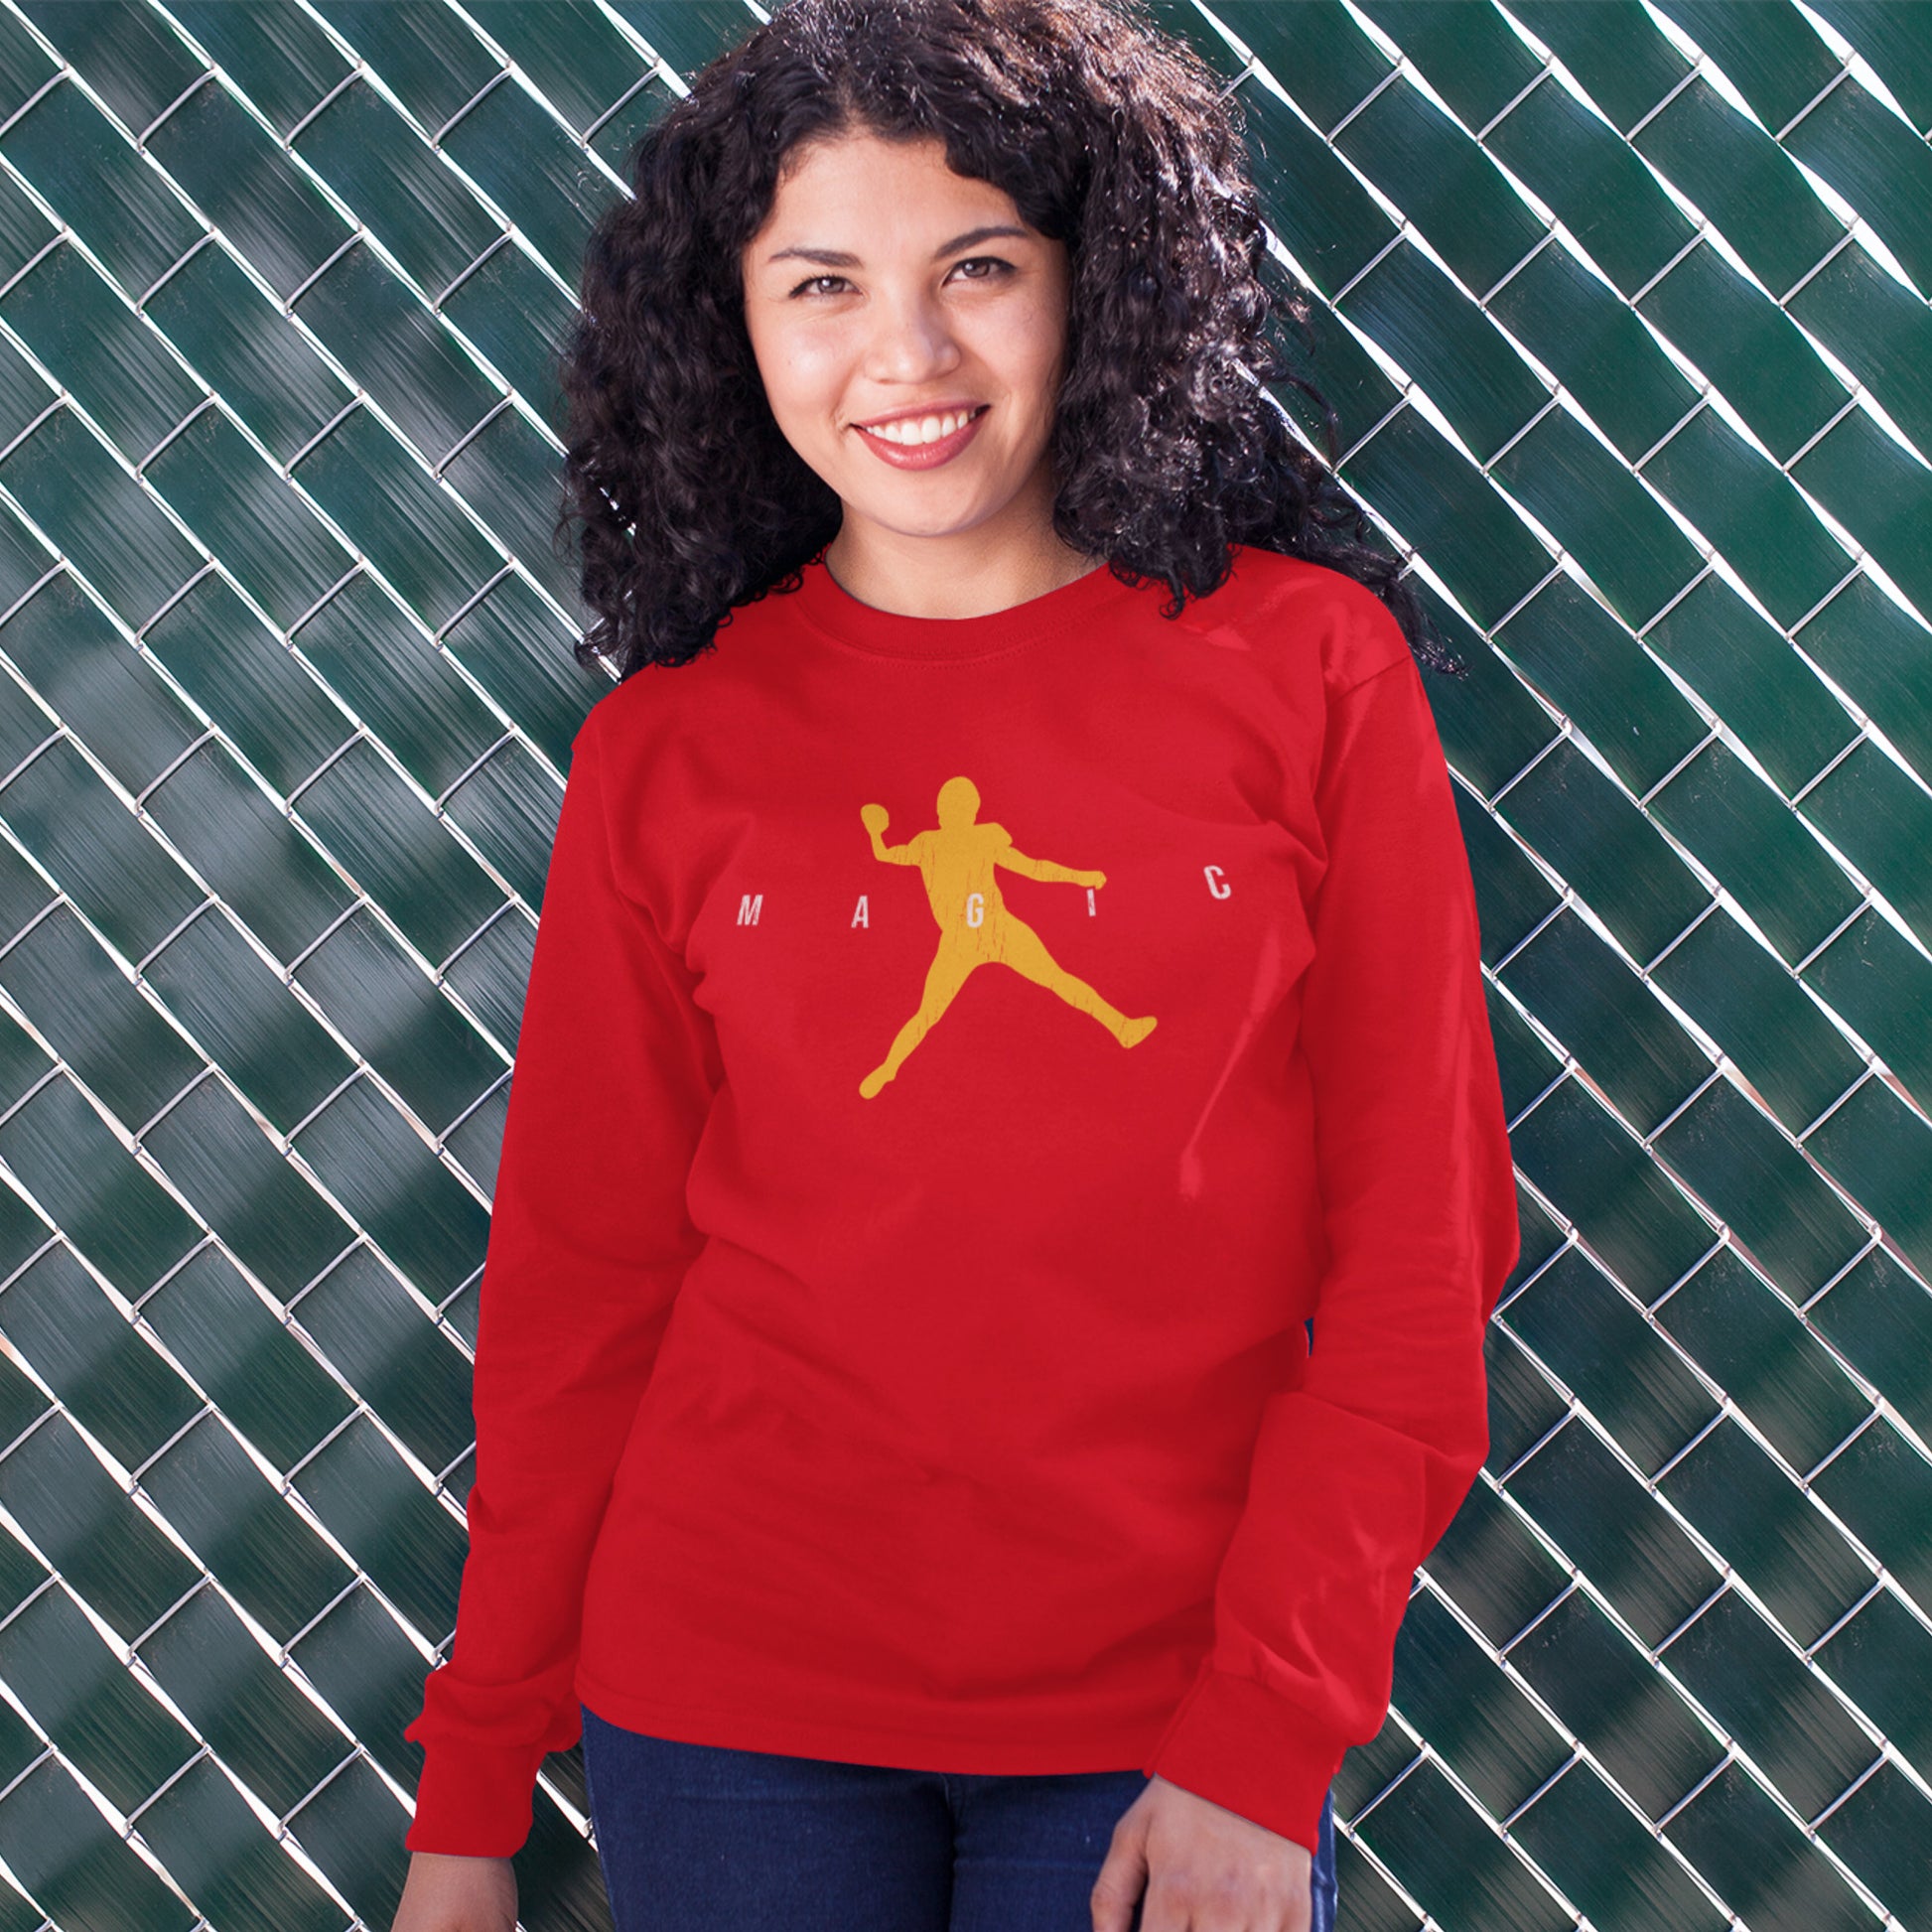 KC Swag Kansas City Chiefs Distressed White & Gold Magic Air Mahomie on a Red Crewneck Sweatshirt worn by curly hair female model standing in front of a green tiled wall